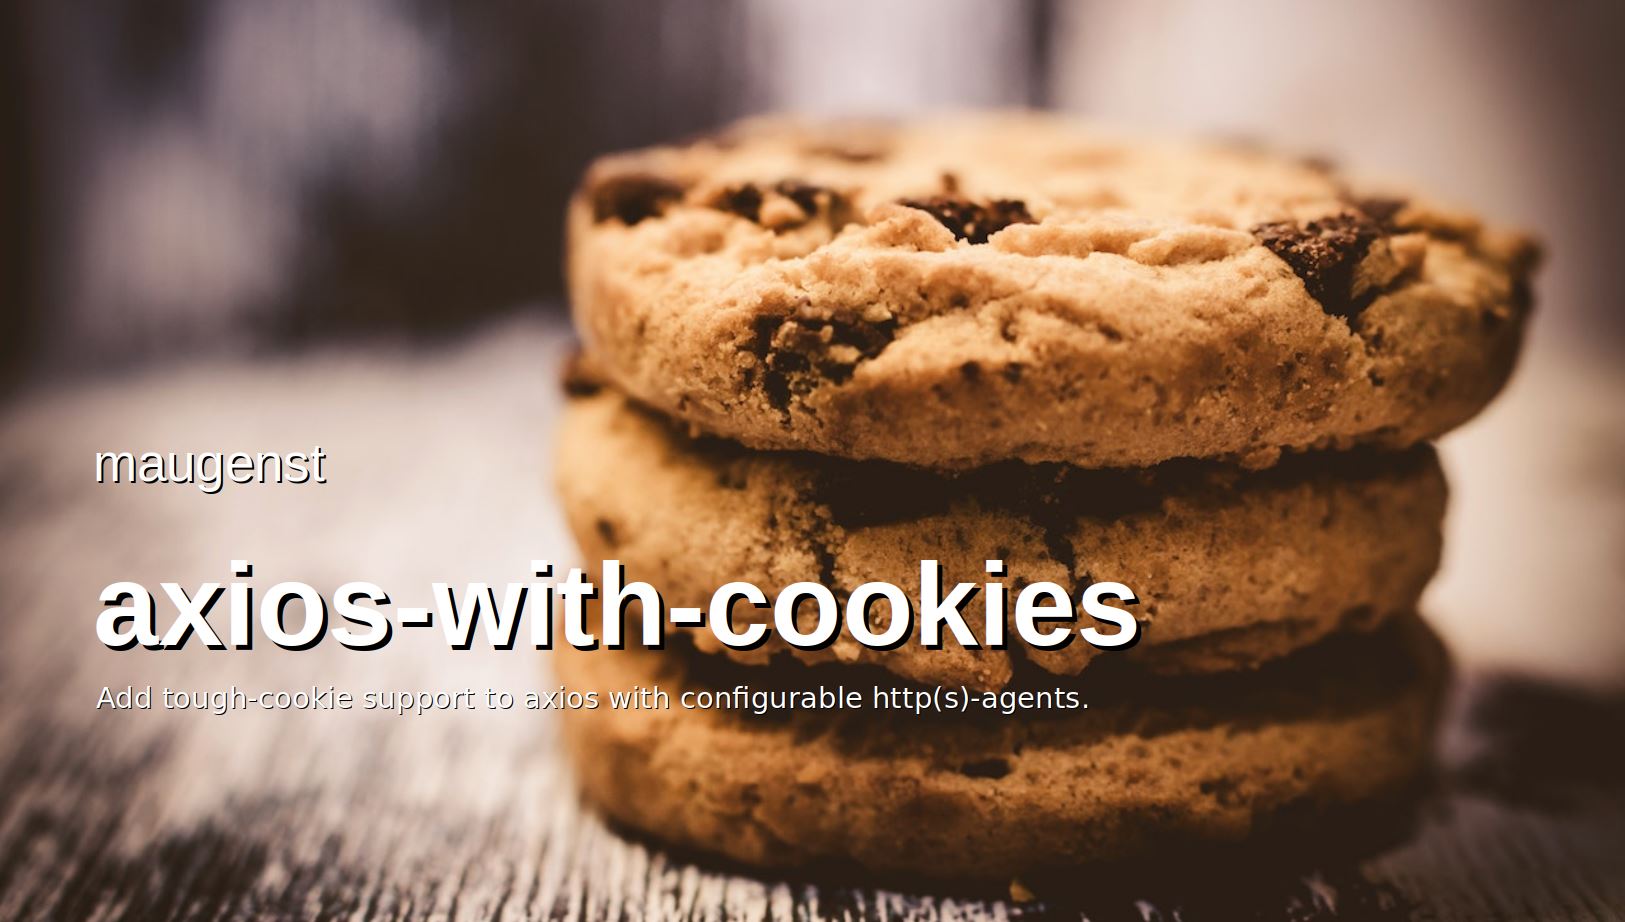 axios-with-cookies